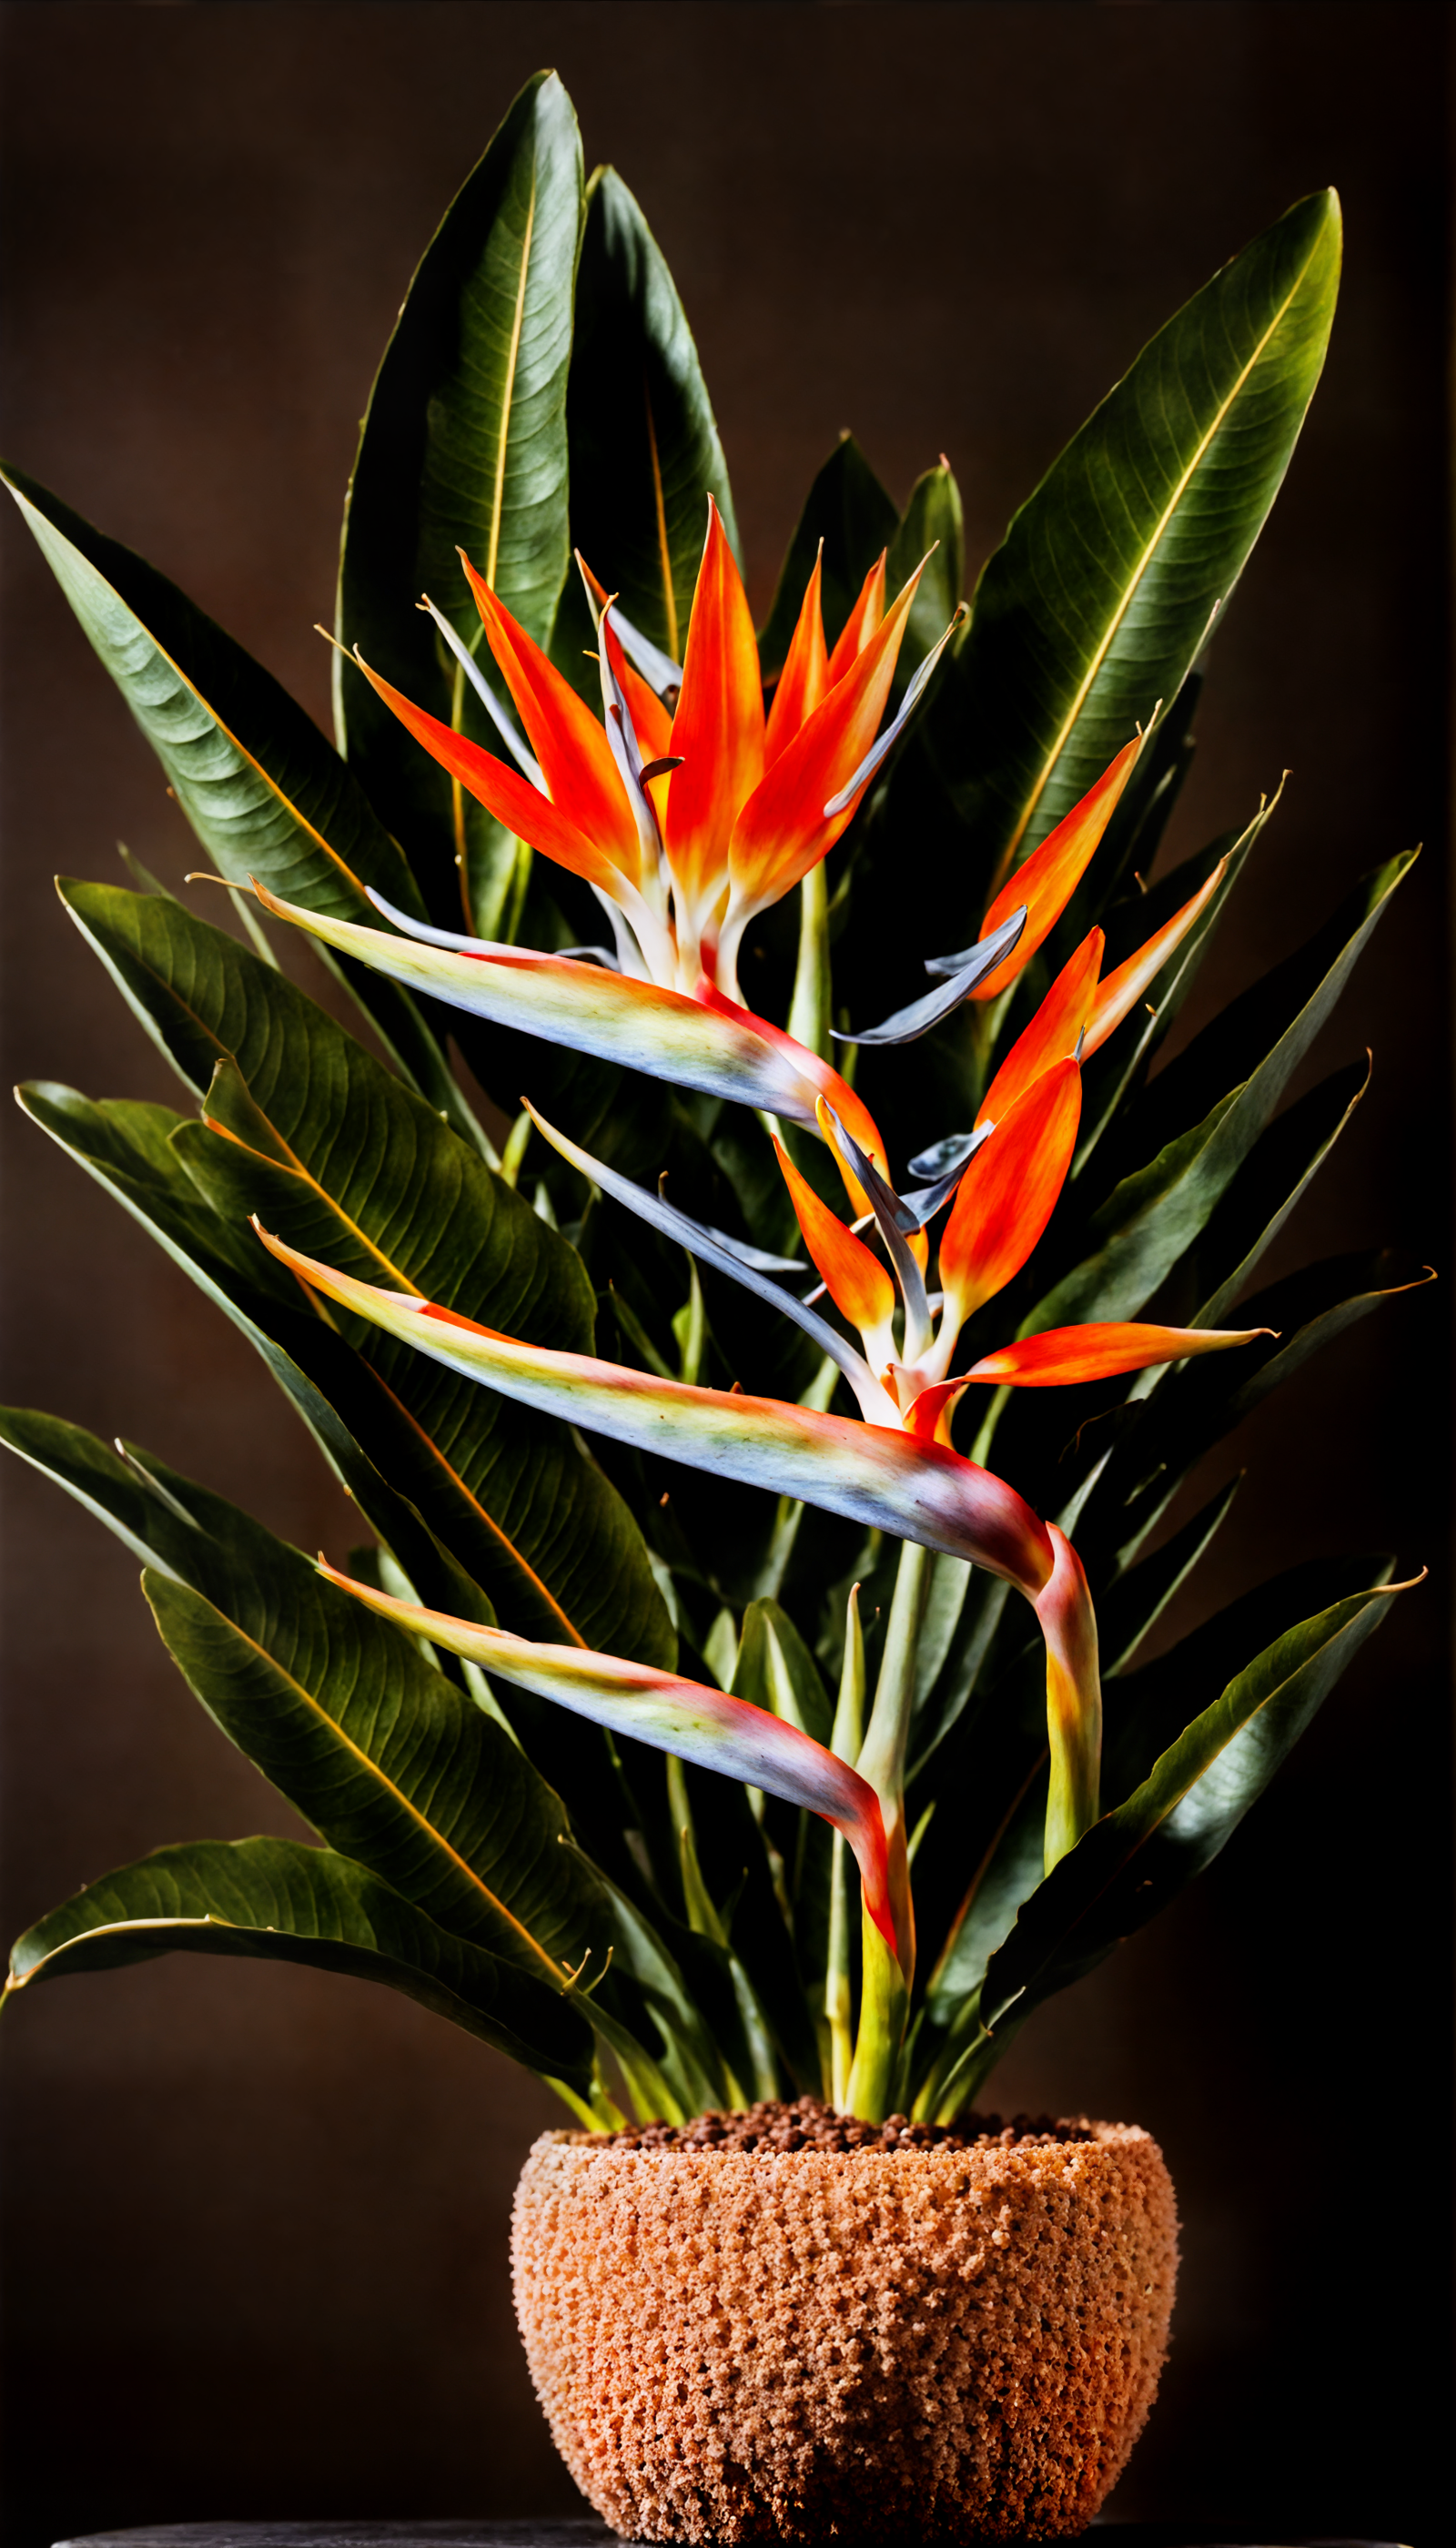 Strelitzia reginae with vibrant red flowers in a planter, clear lighting against a dark background.